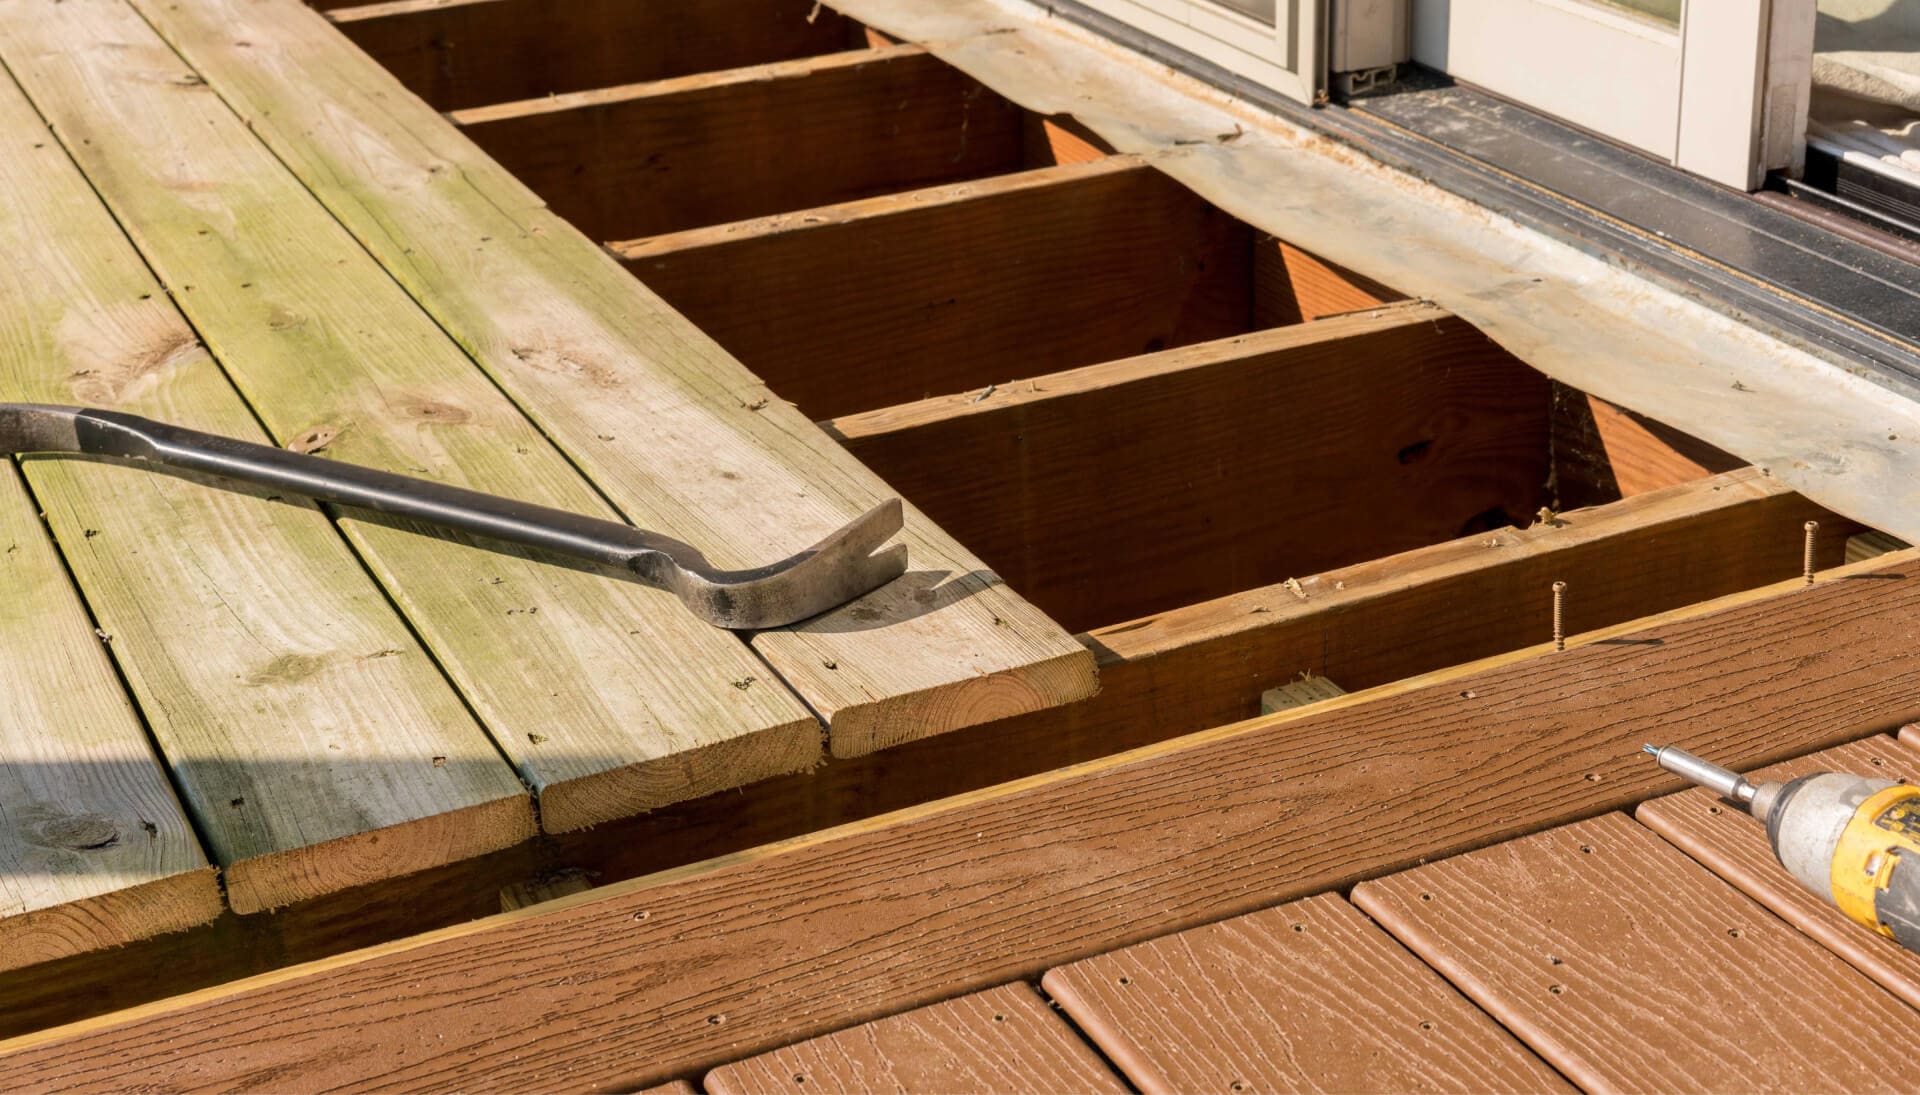 We offer the best deck repair services in Portland, OR